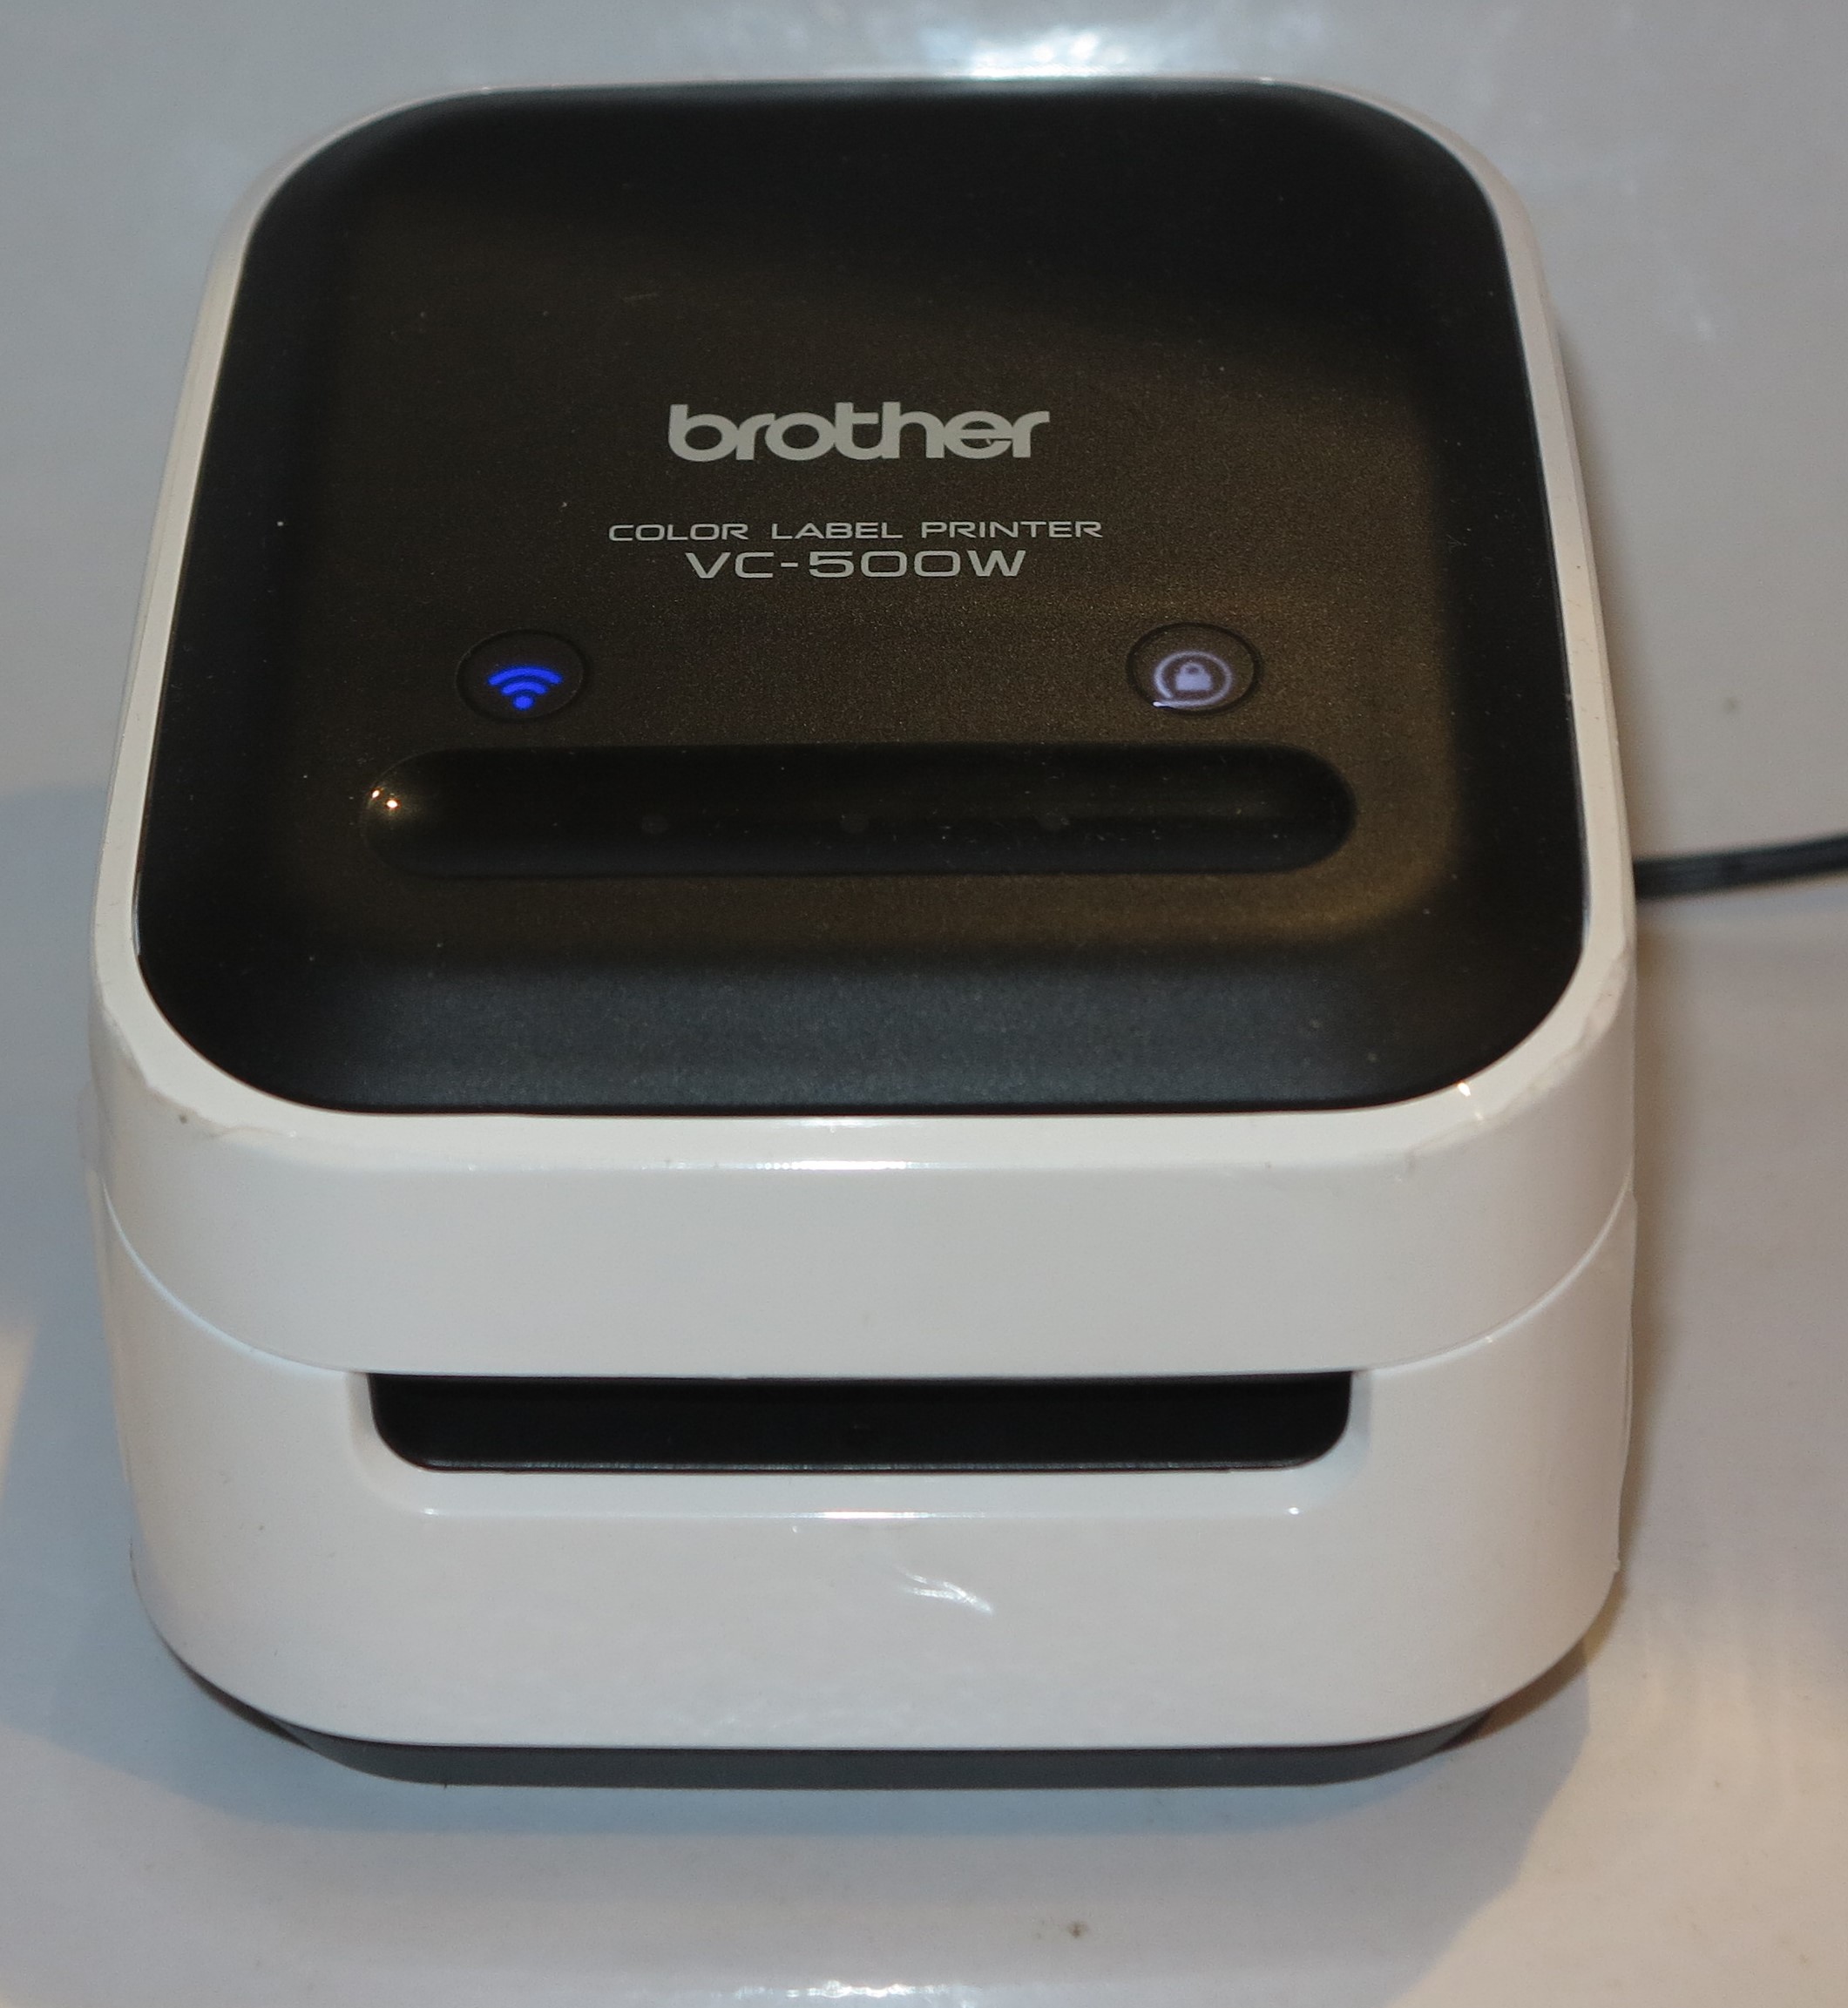 Product Review–Brother VC-500W Colour Label Printer